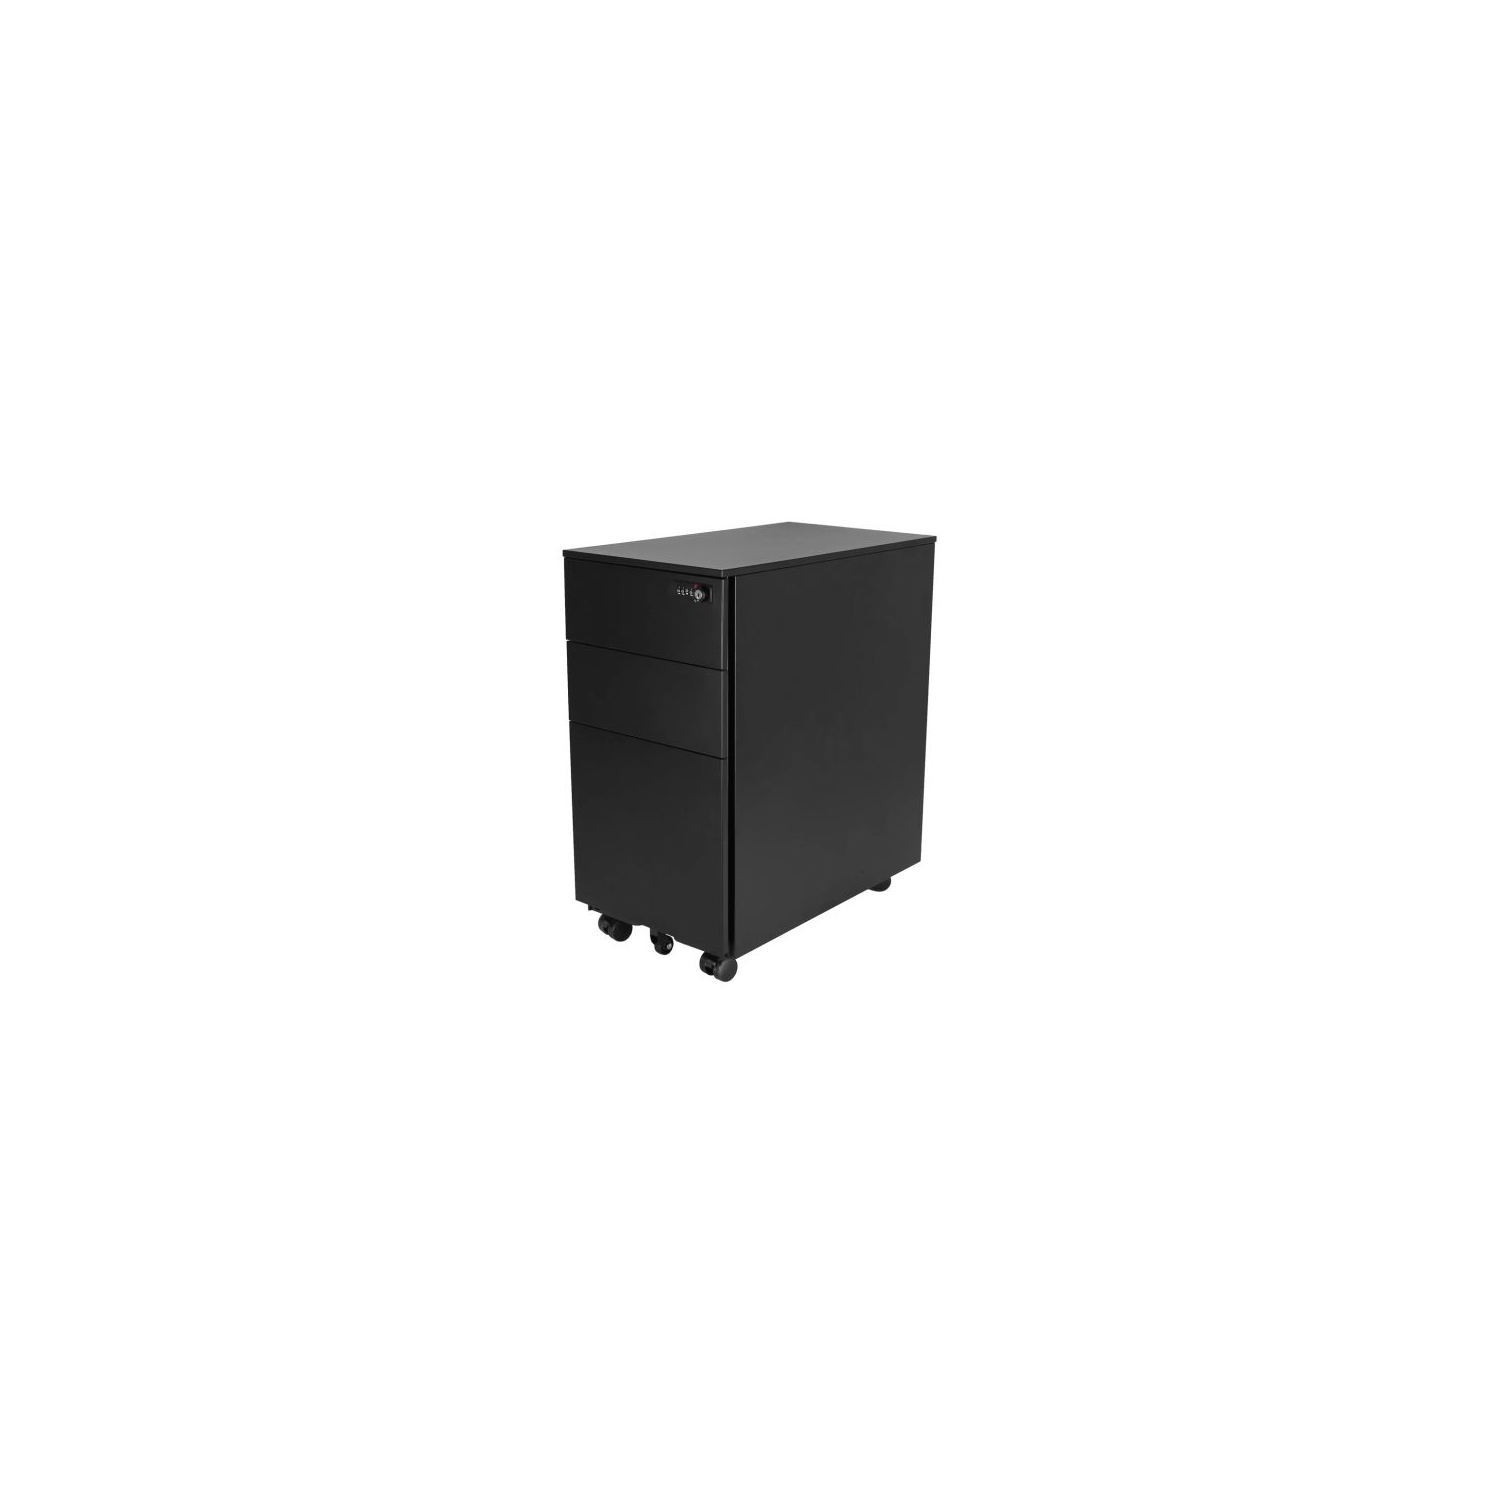 Intellibrands Metal Office File Cabinet 3 Drawer With Lock